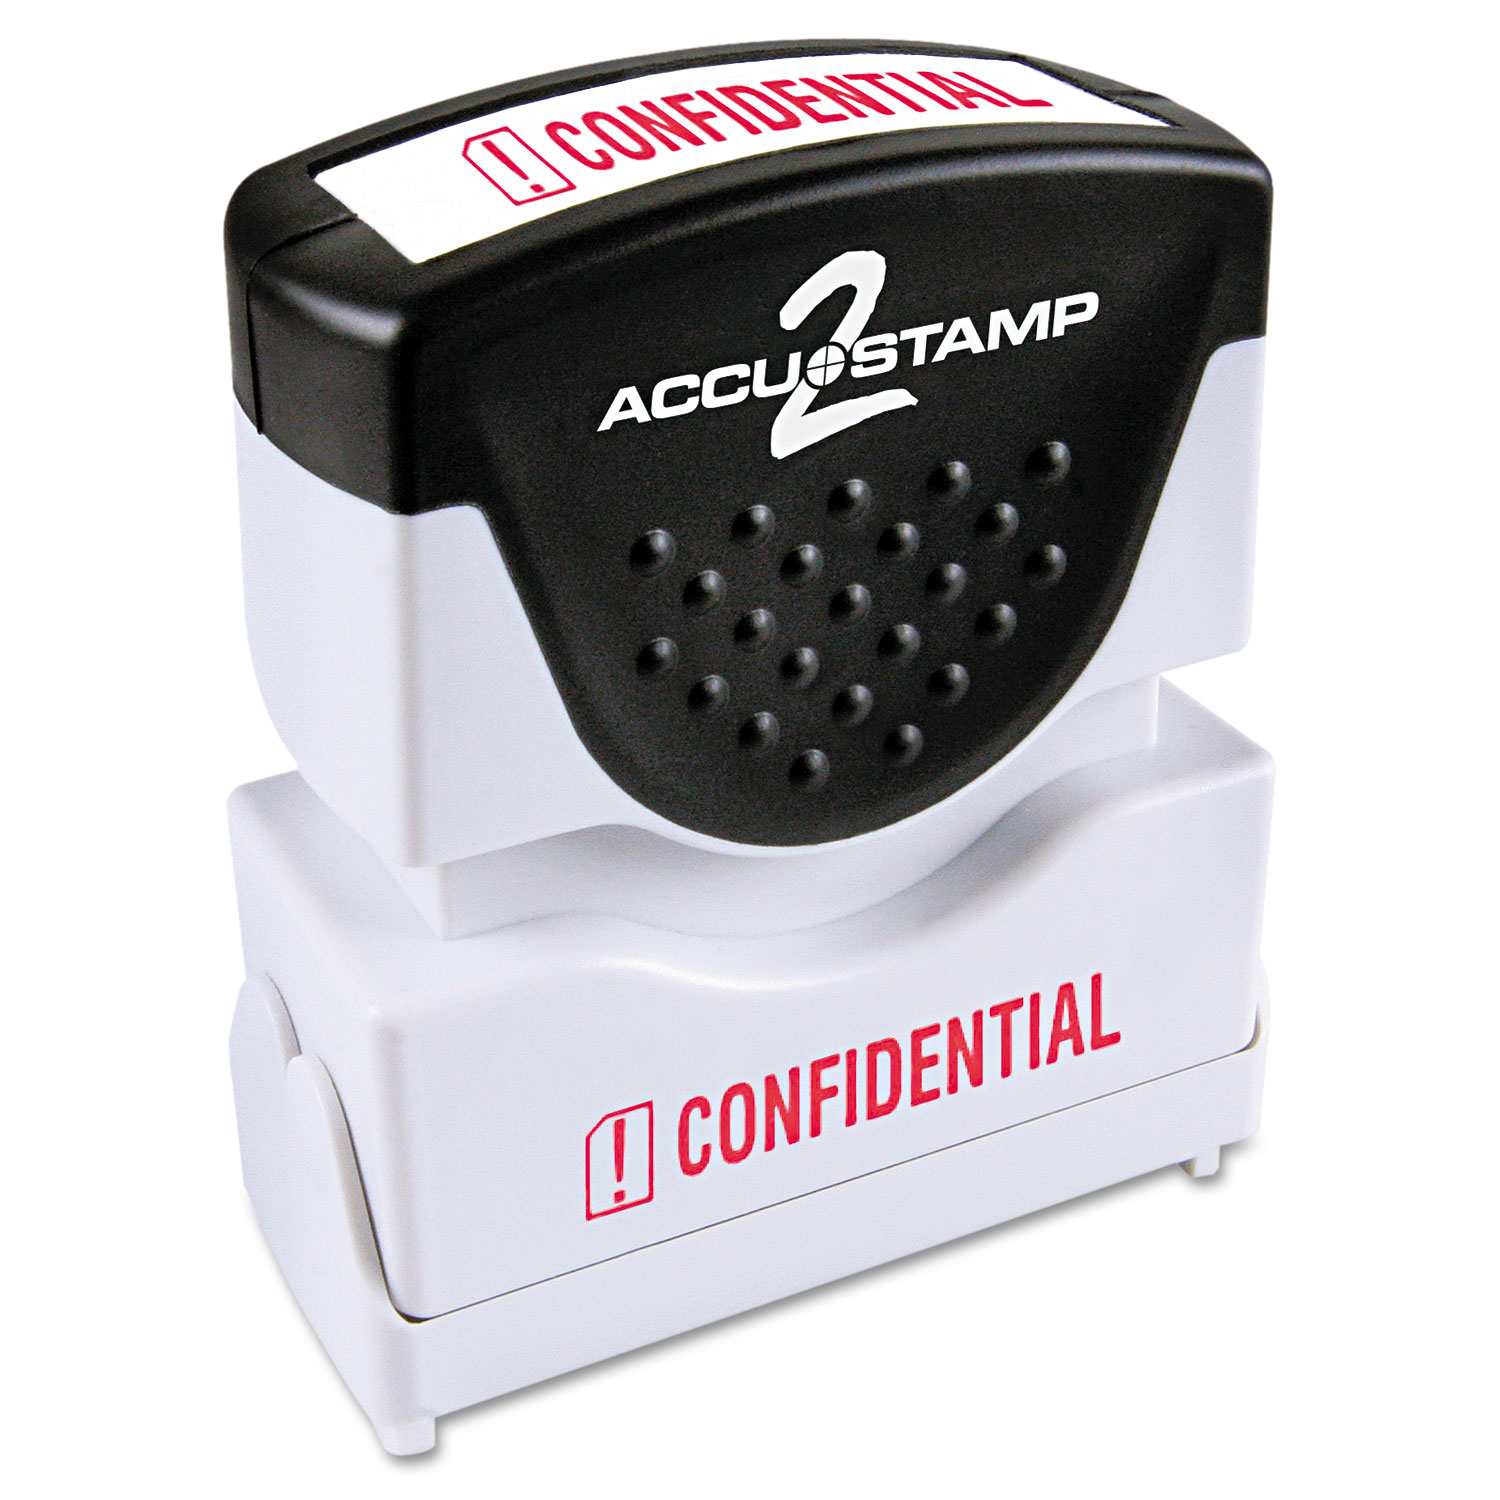  ACCUSTAMP2 035574 Pre-Inked Shutter Stamp, Red, CONFIDENTIAL, 1 5/8 x 1/2 (COS035574) 